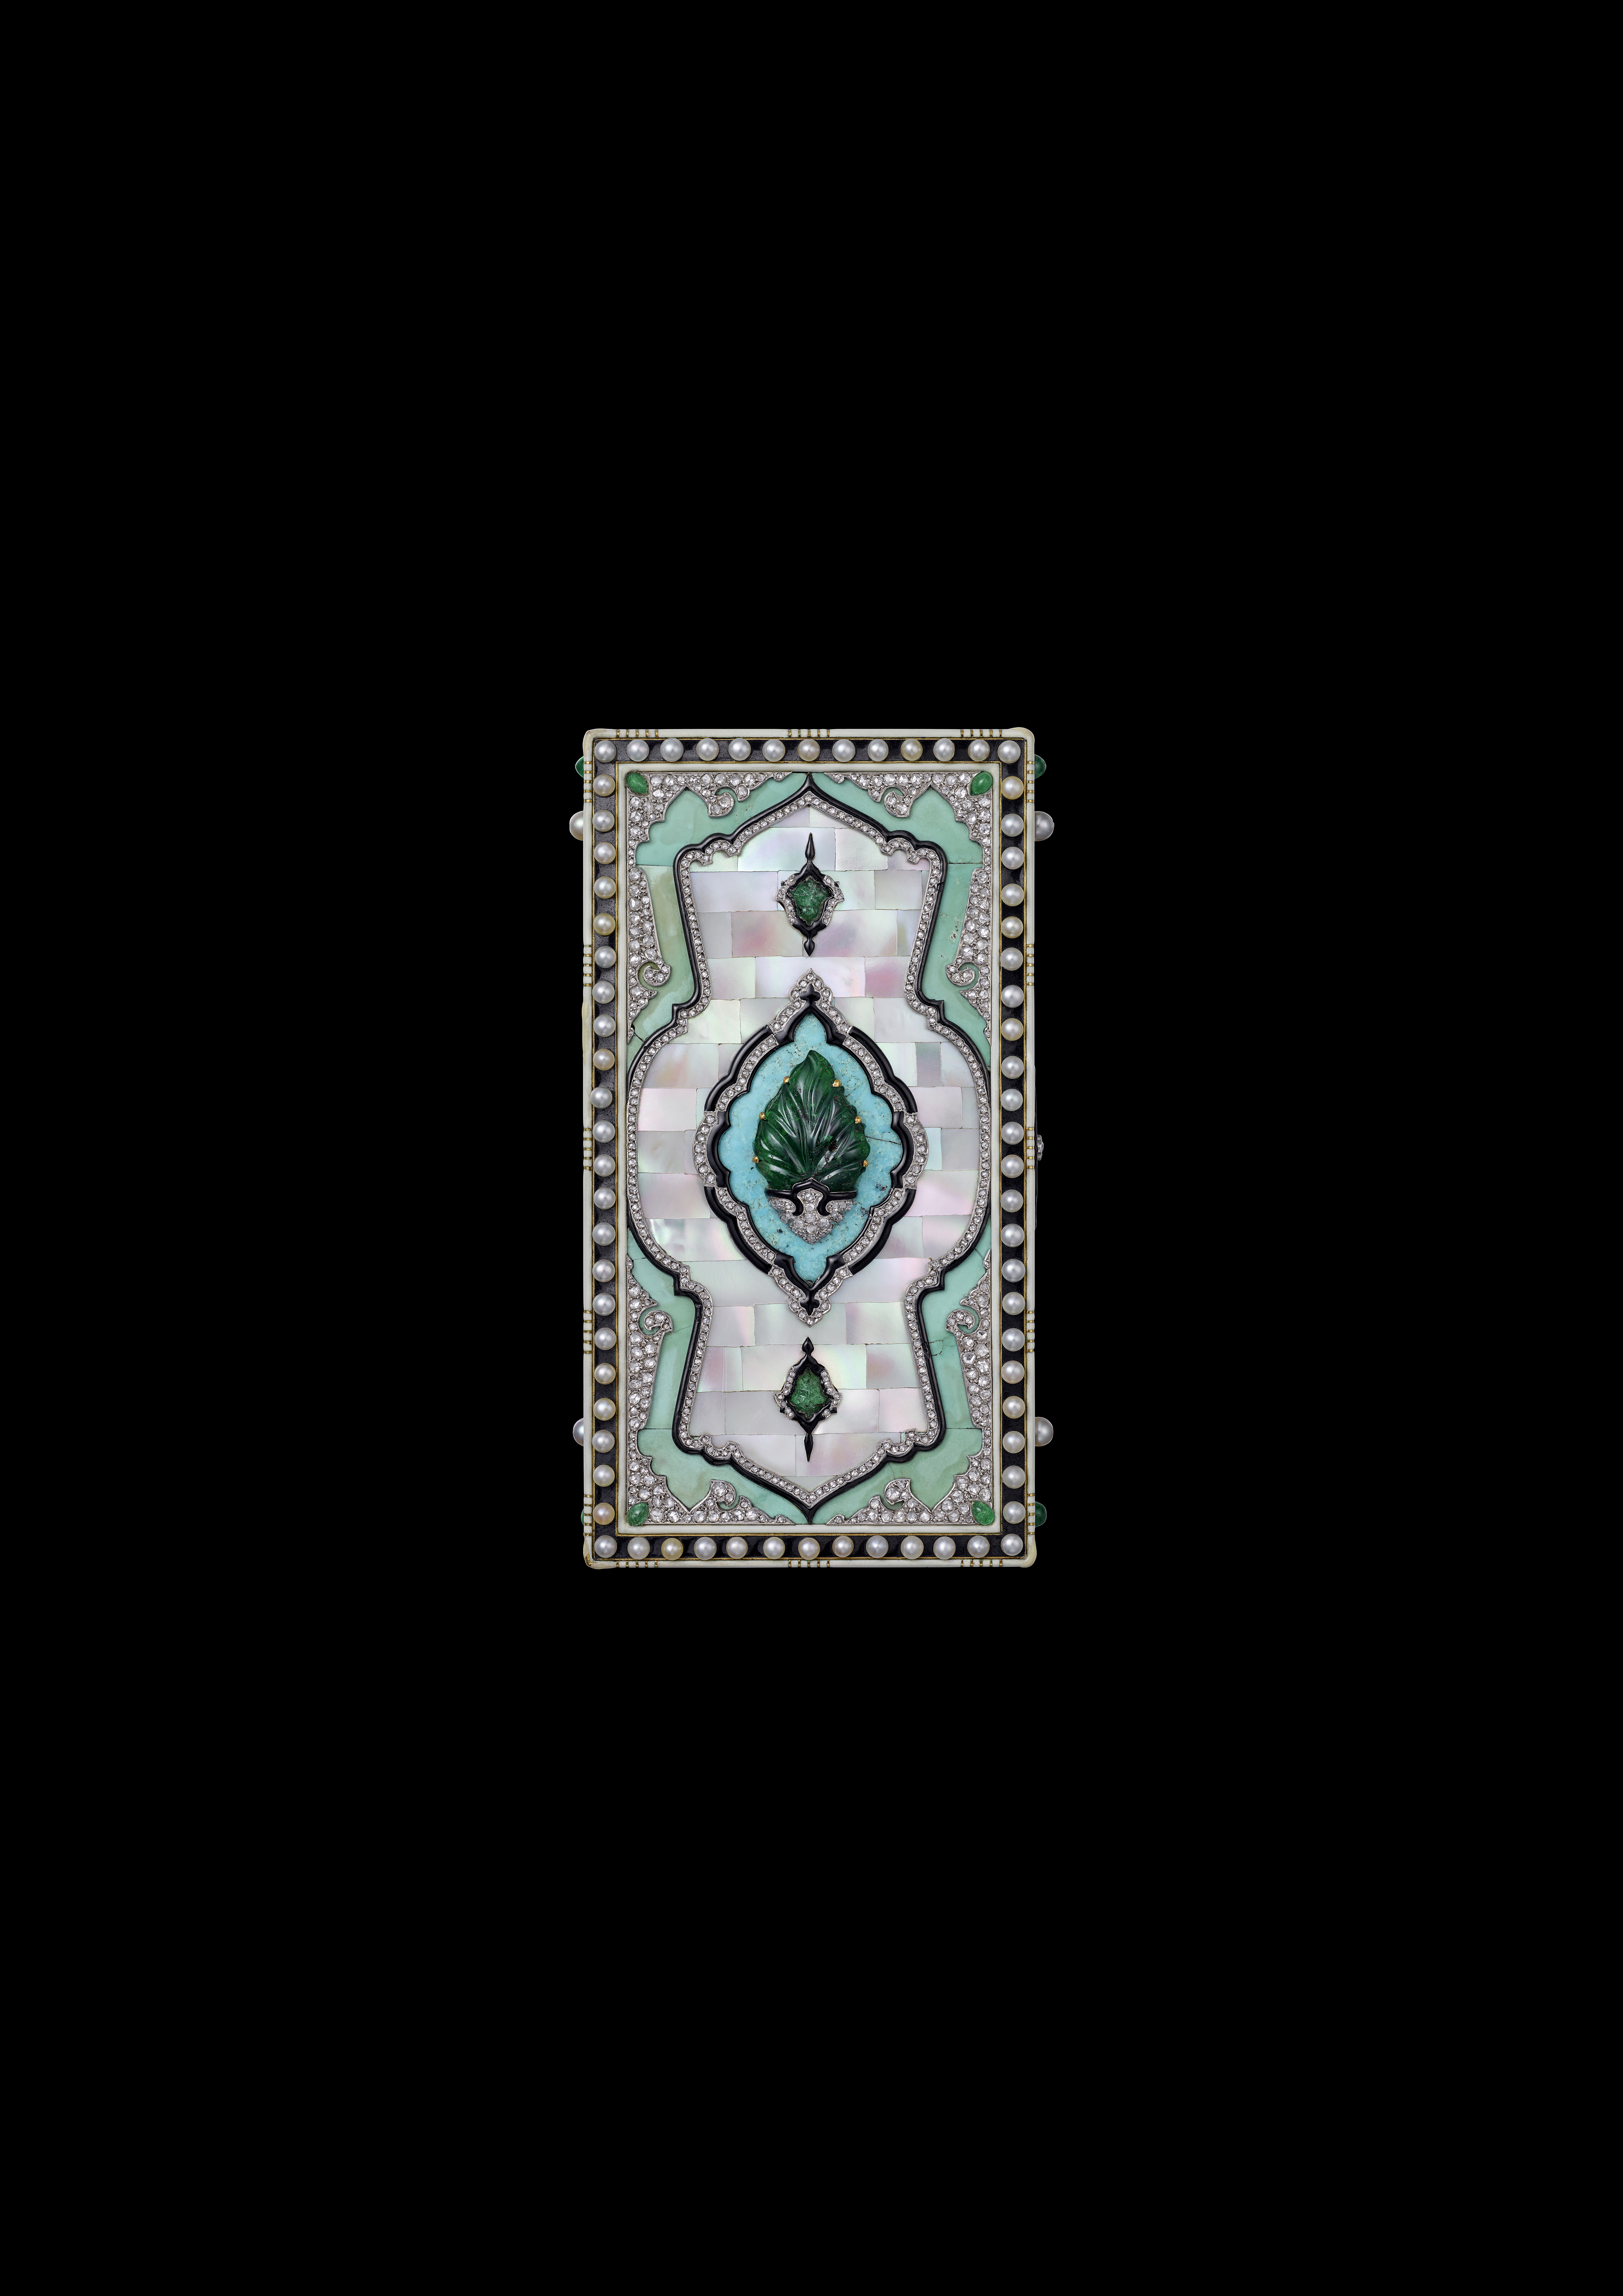 Vanity case, Cartier Paris, 1924. Gold, platinum, parquetry of mother-of- pearl and turquoise, emeralds, pearls, diamonds, black and cream enamel. Cartier Collection. Nils Herrmann, Cartier Collection © Cartier 